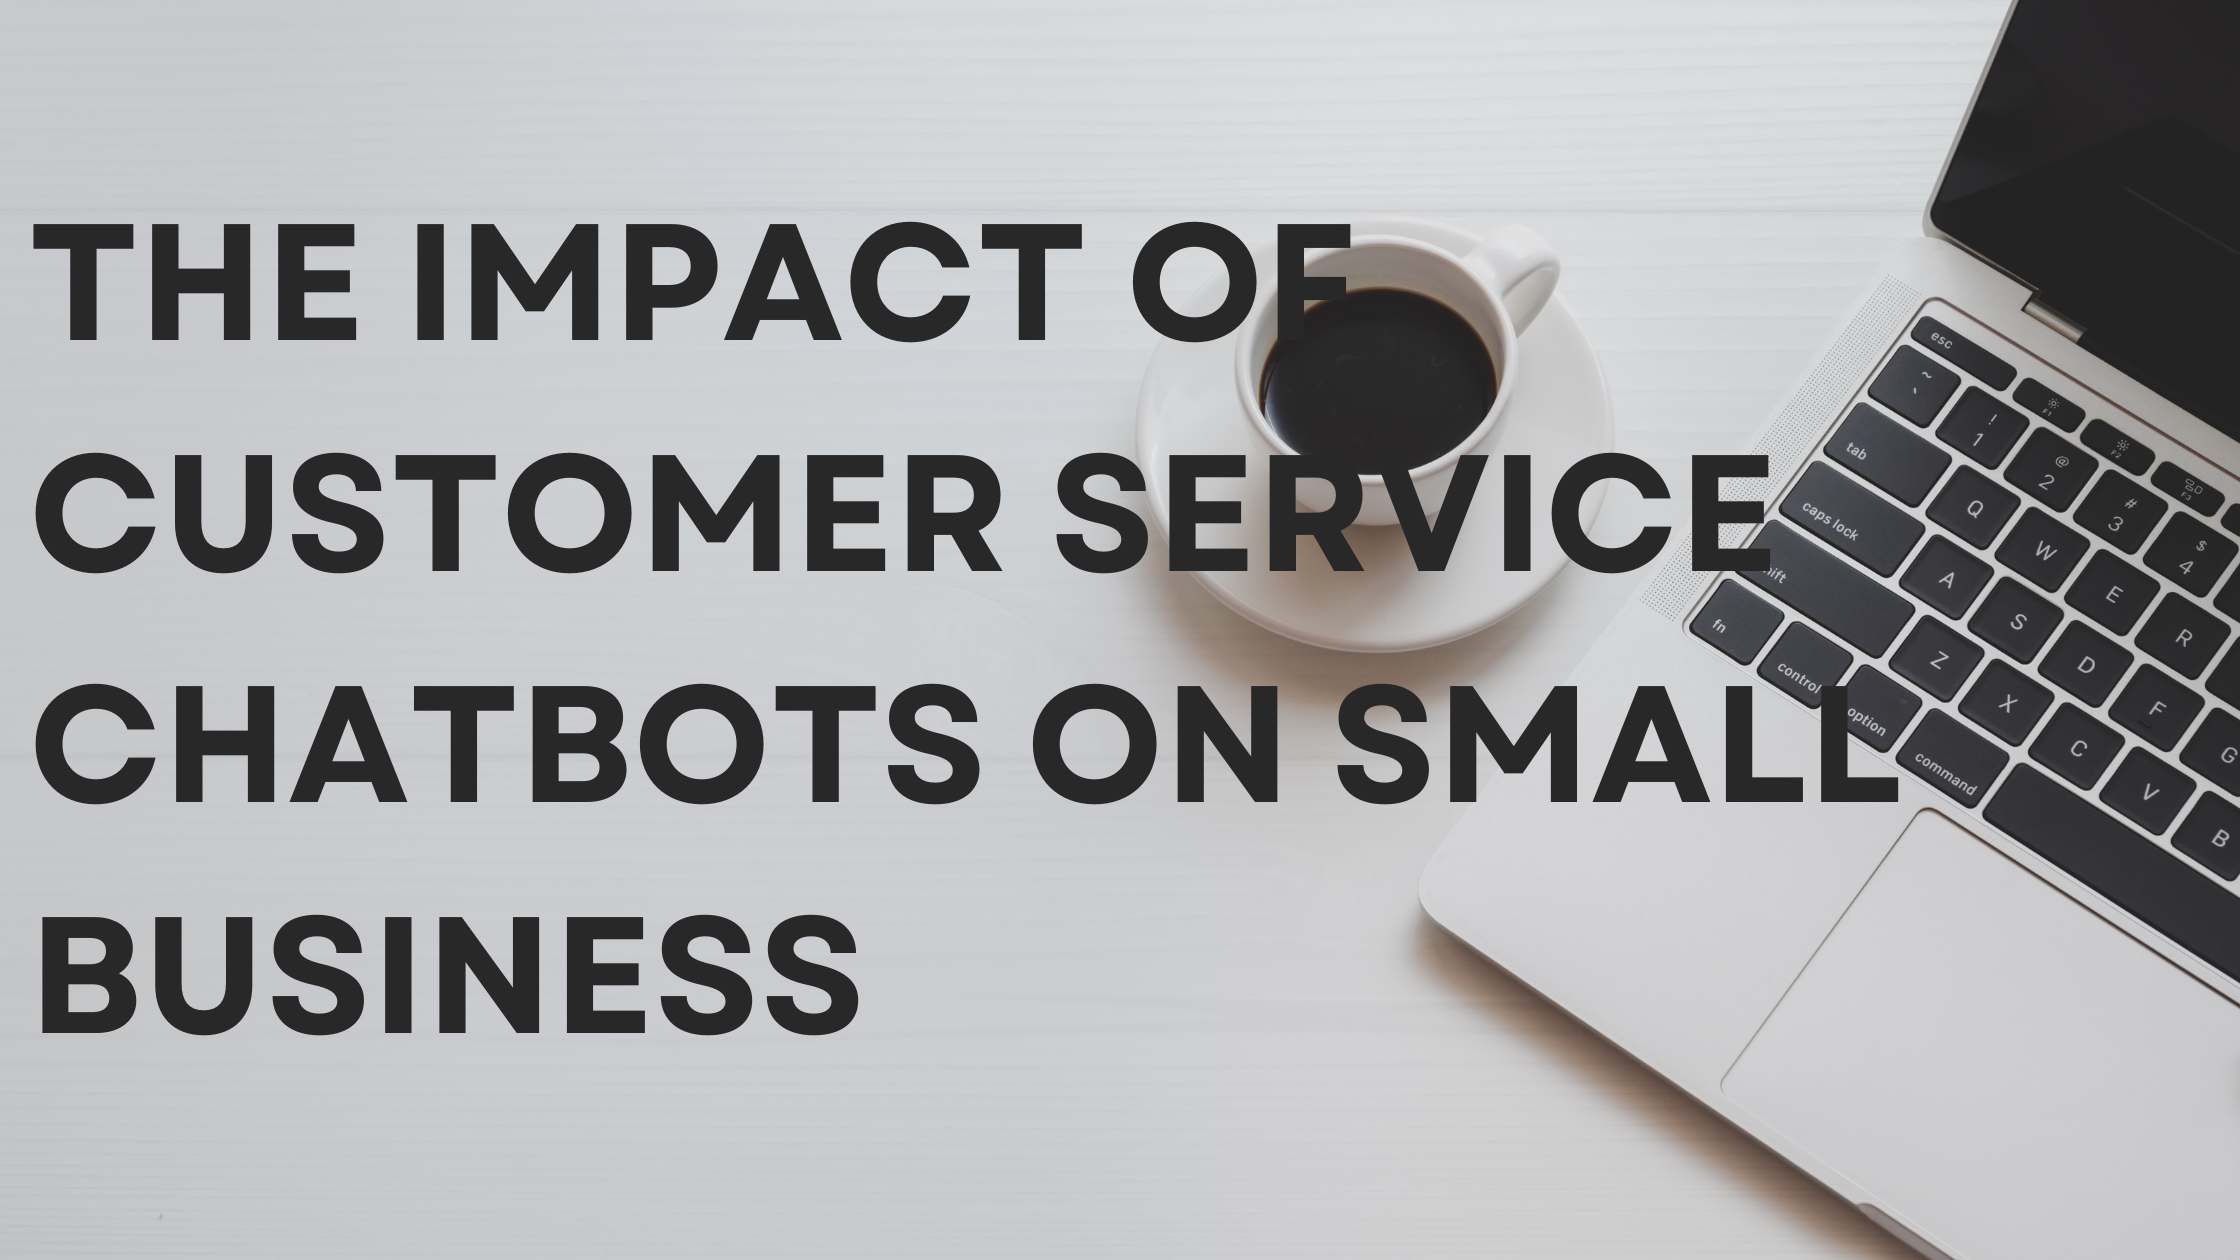 The Impact of Customer Service Chatbots on Small Business